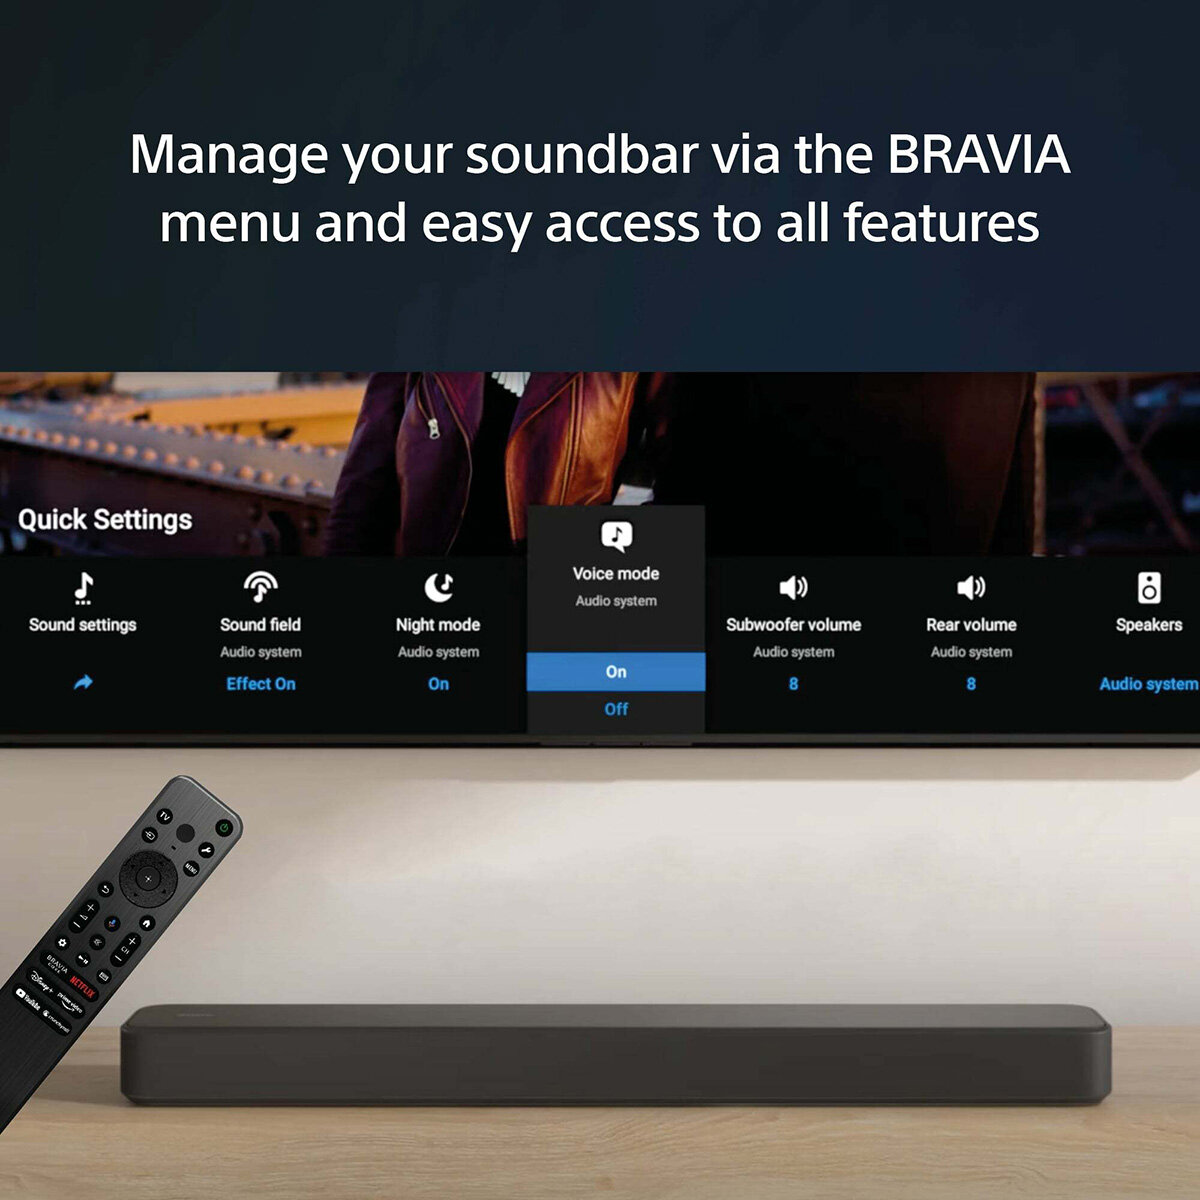 Buy Sony HTS2000 3.1 Ch, 250W, Soundbar with Built-in Subwoofer and Bluetooth at Costco.co.uk